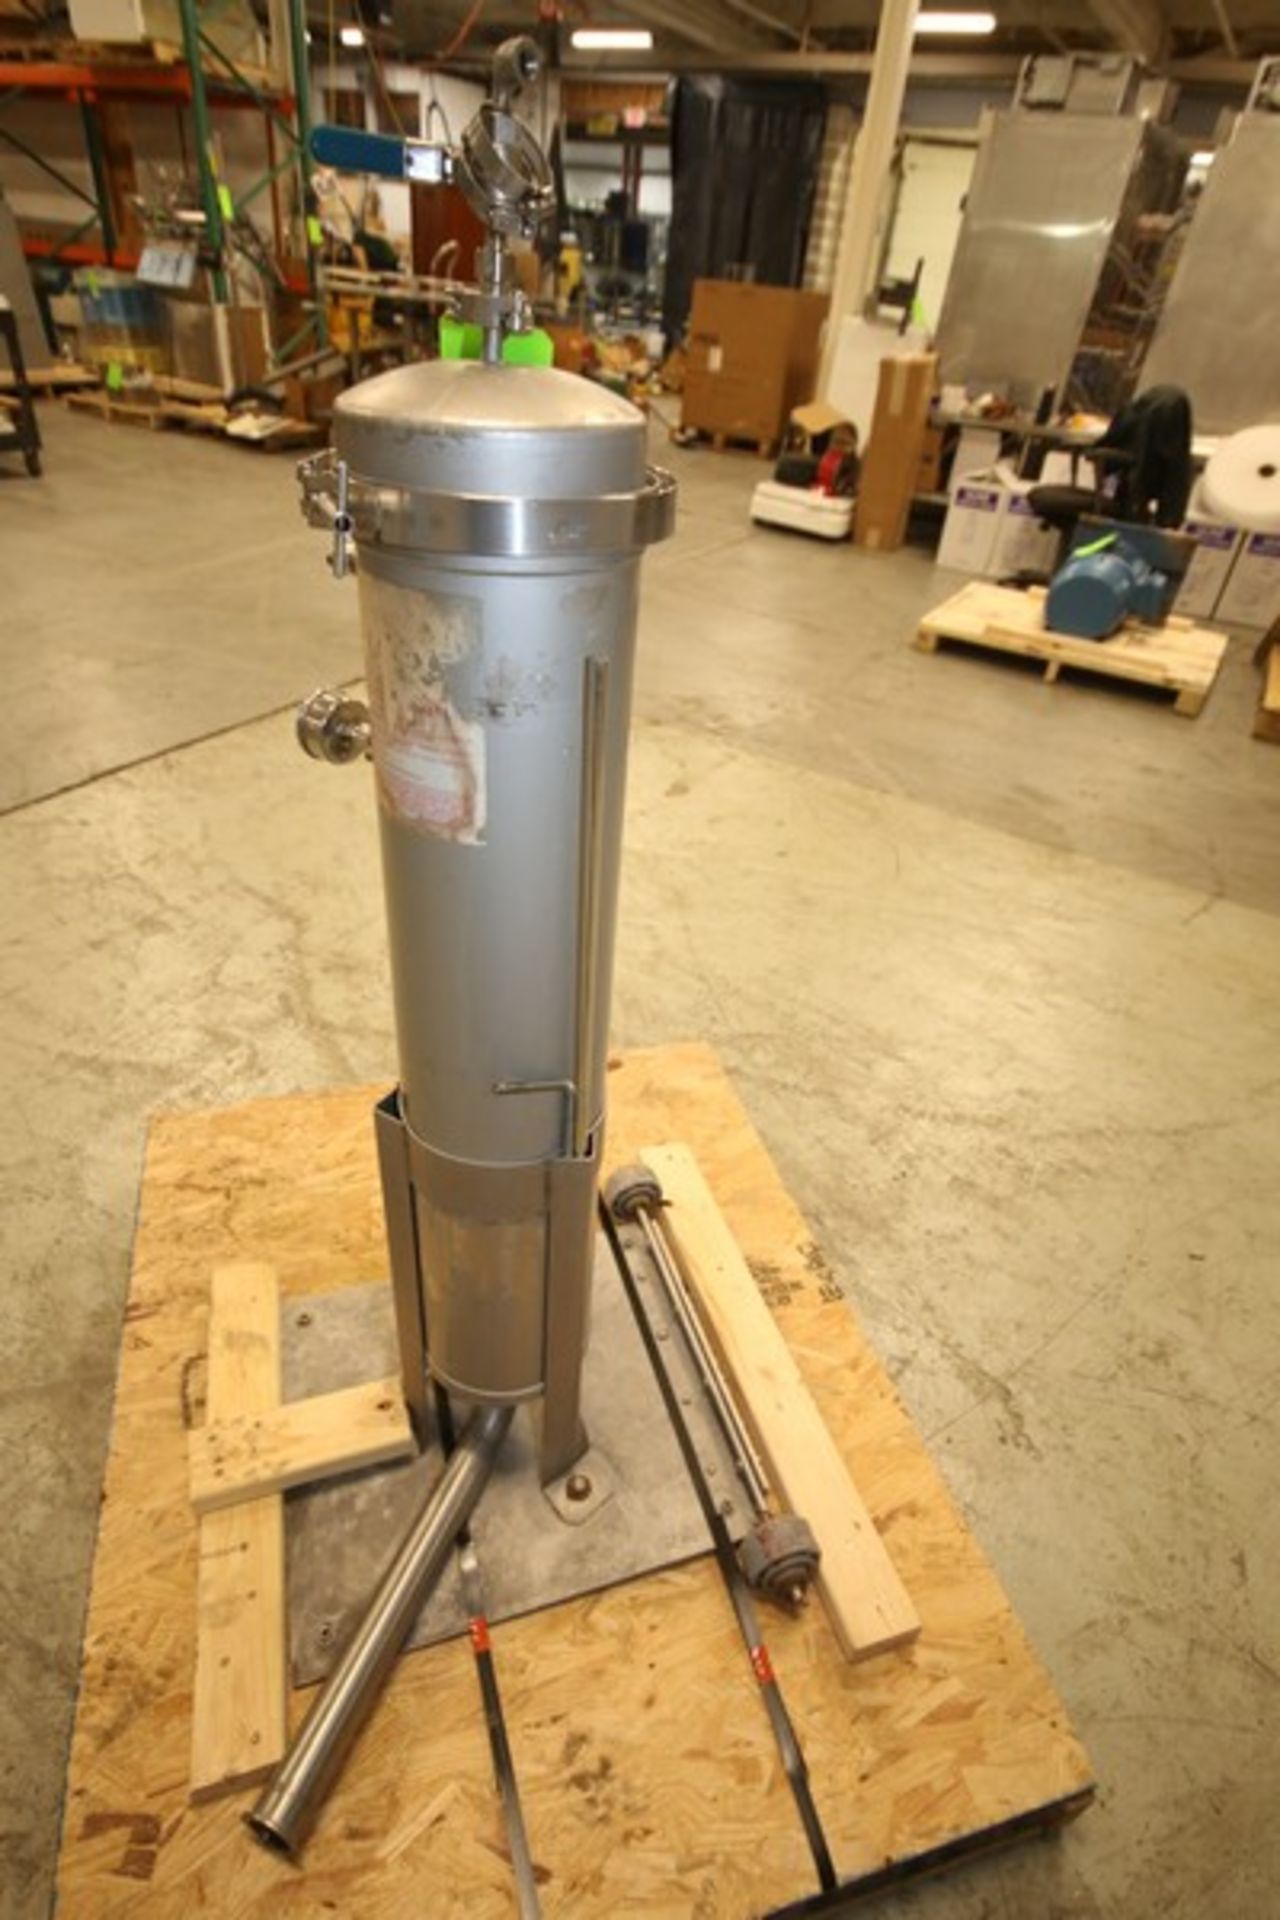 Shelco 40" H x 8" W In-Line Vertical S/S Filter, Model BFS-2C-316-2TC-5TCV, SN 98992, with 2" CT - Image 4 of 6